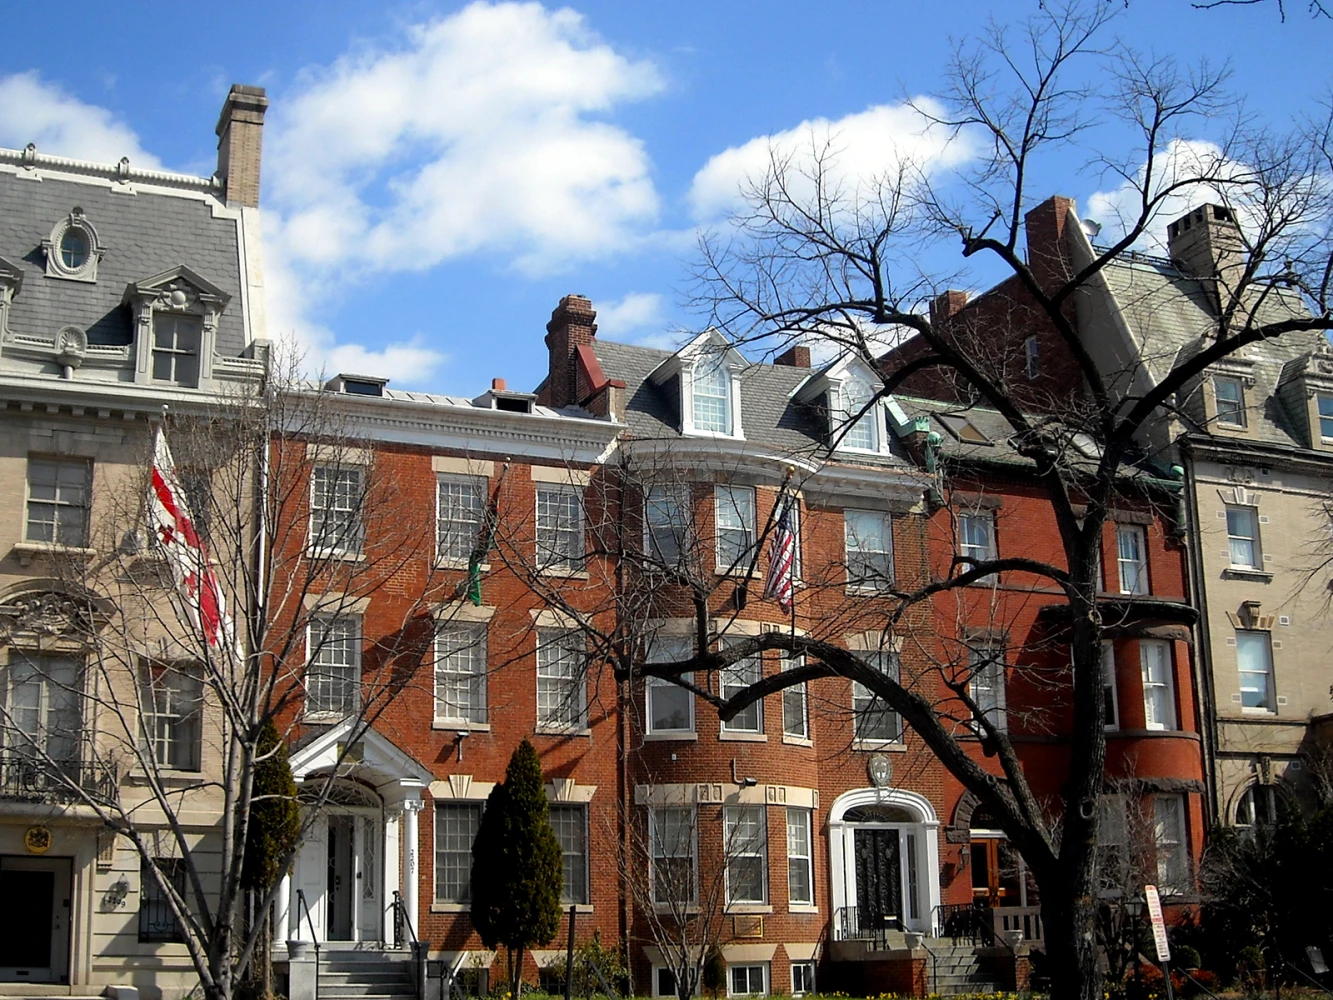 Dupont Circle & Embassy Row Architecture Tour: What to expect - 1